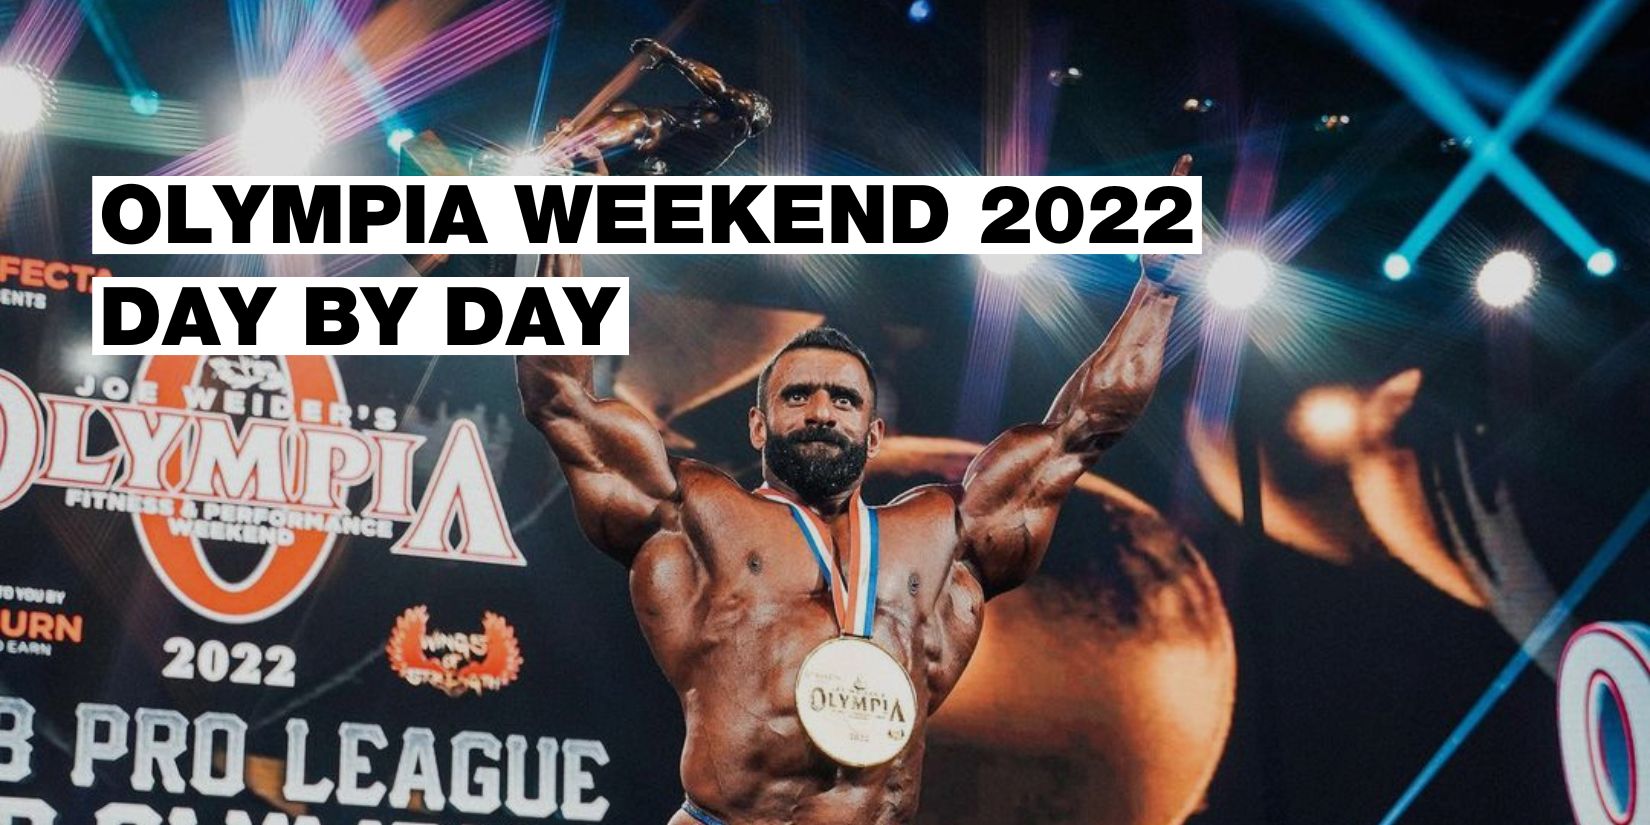 The most anticipated moment of 2022 is behind us and it rewrote history. How was the Olympia Weekend 2022?